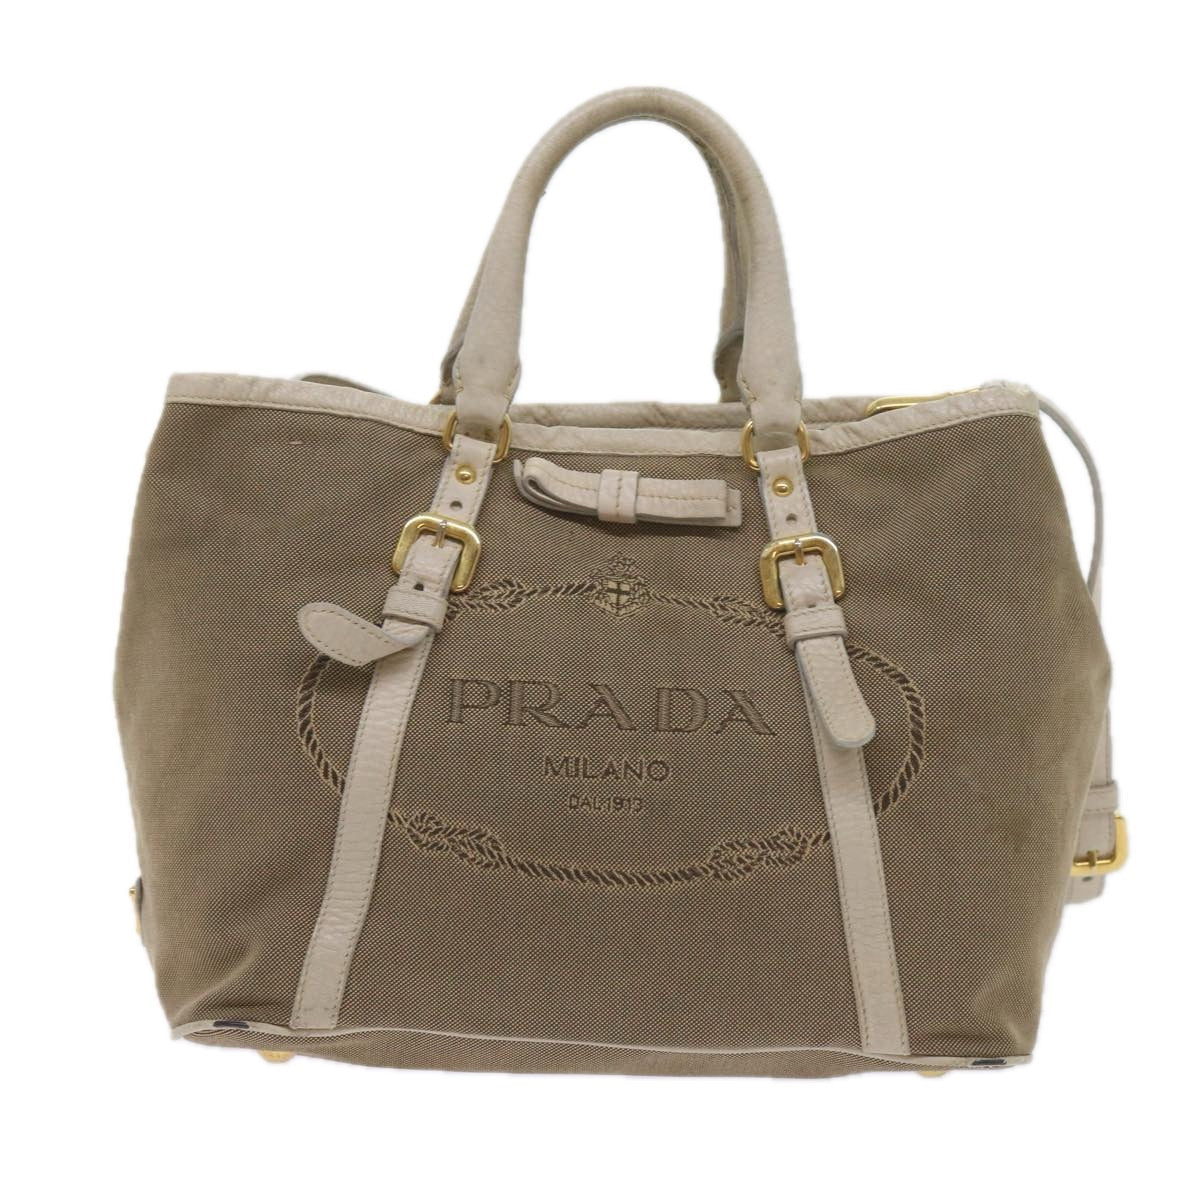 PRADA Hand Bag Canvas Leather 2way Brown Auth bs10386 - 0